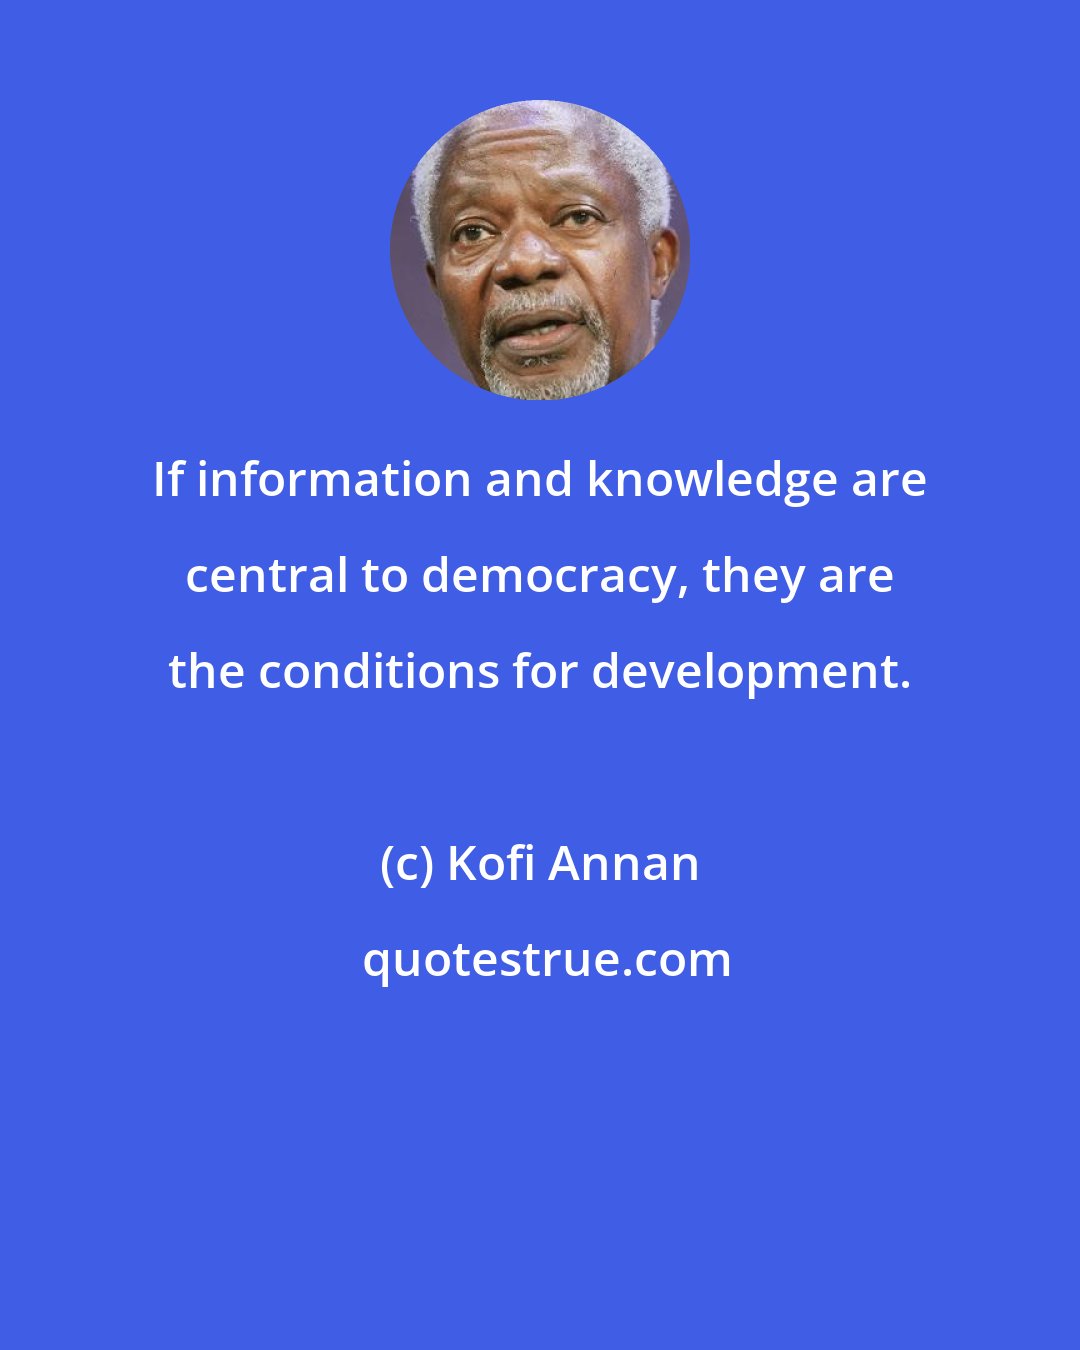 Kofi Annan: If information and knowledge are central to democracy, they are the conditions for development.